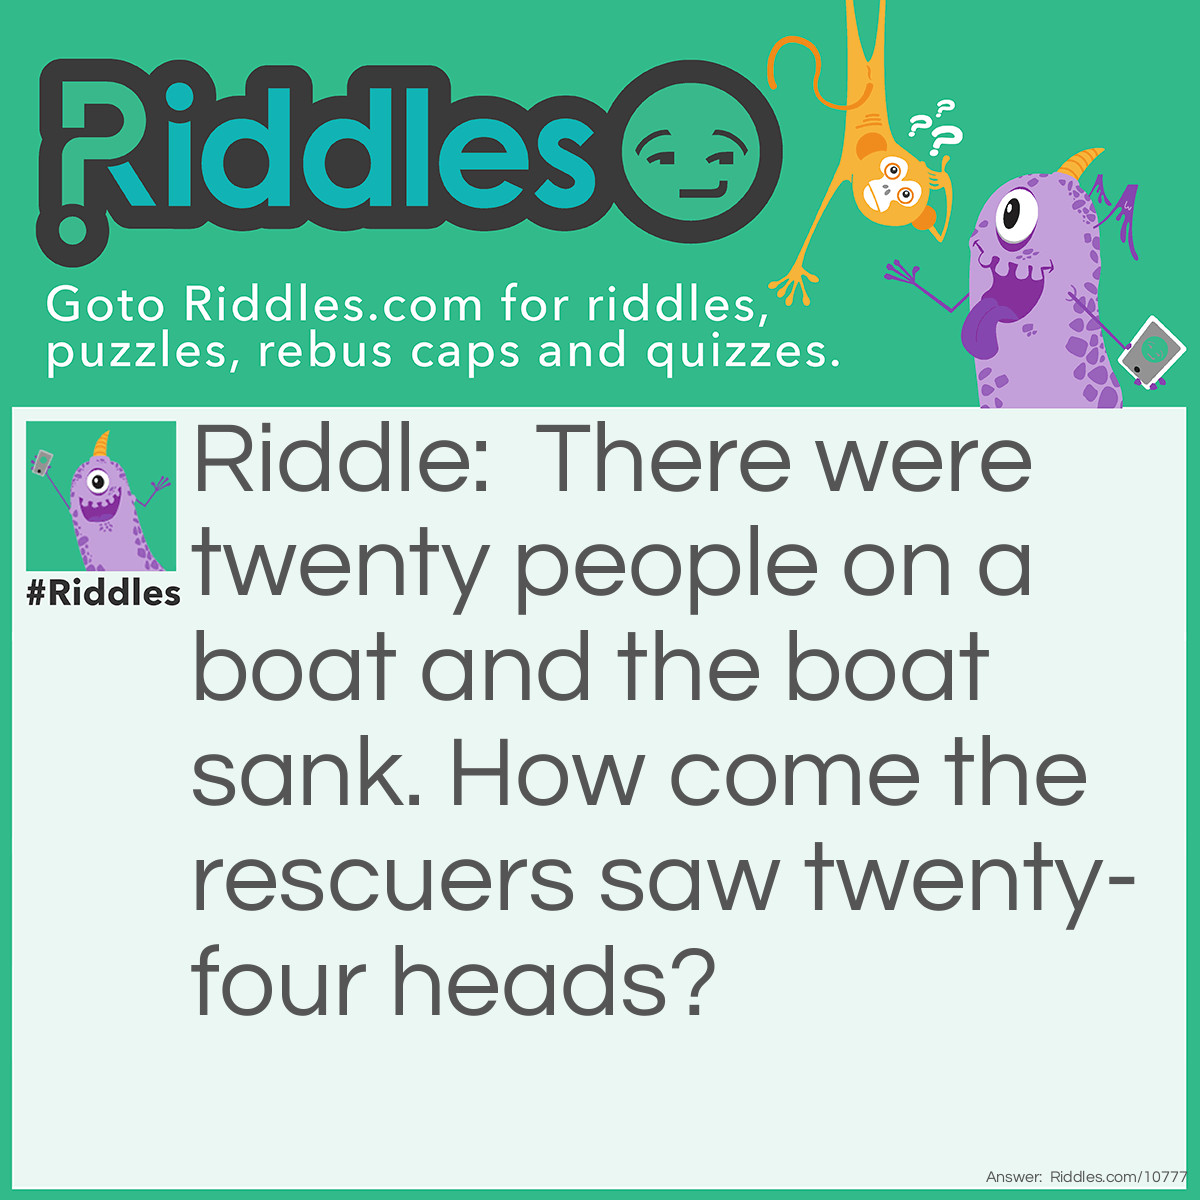 Riddle: There were twenty people on a boat and the boat sank. How come the rescuers saw twenty-four heads? Answer: Twenty foreheads.